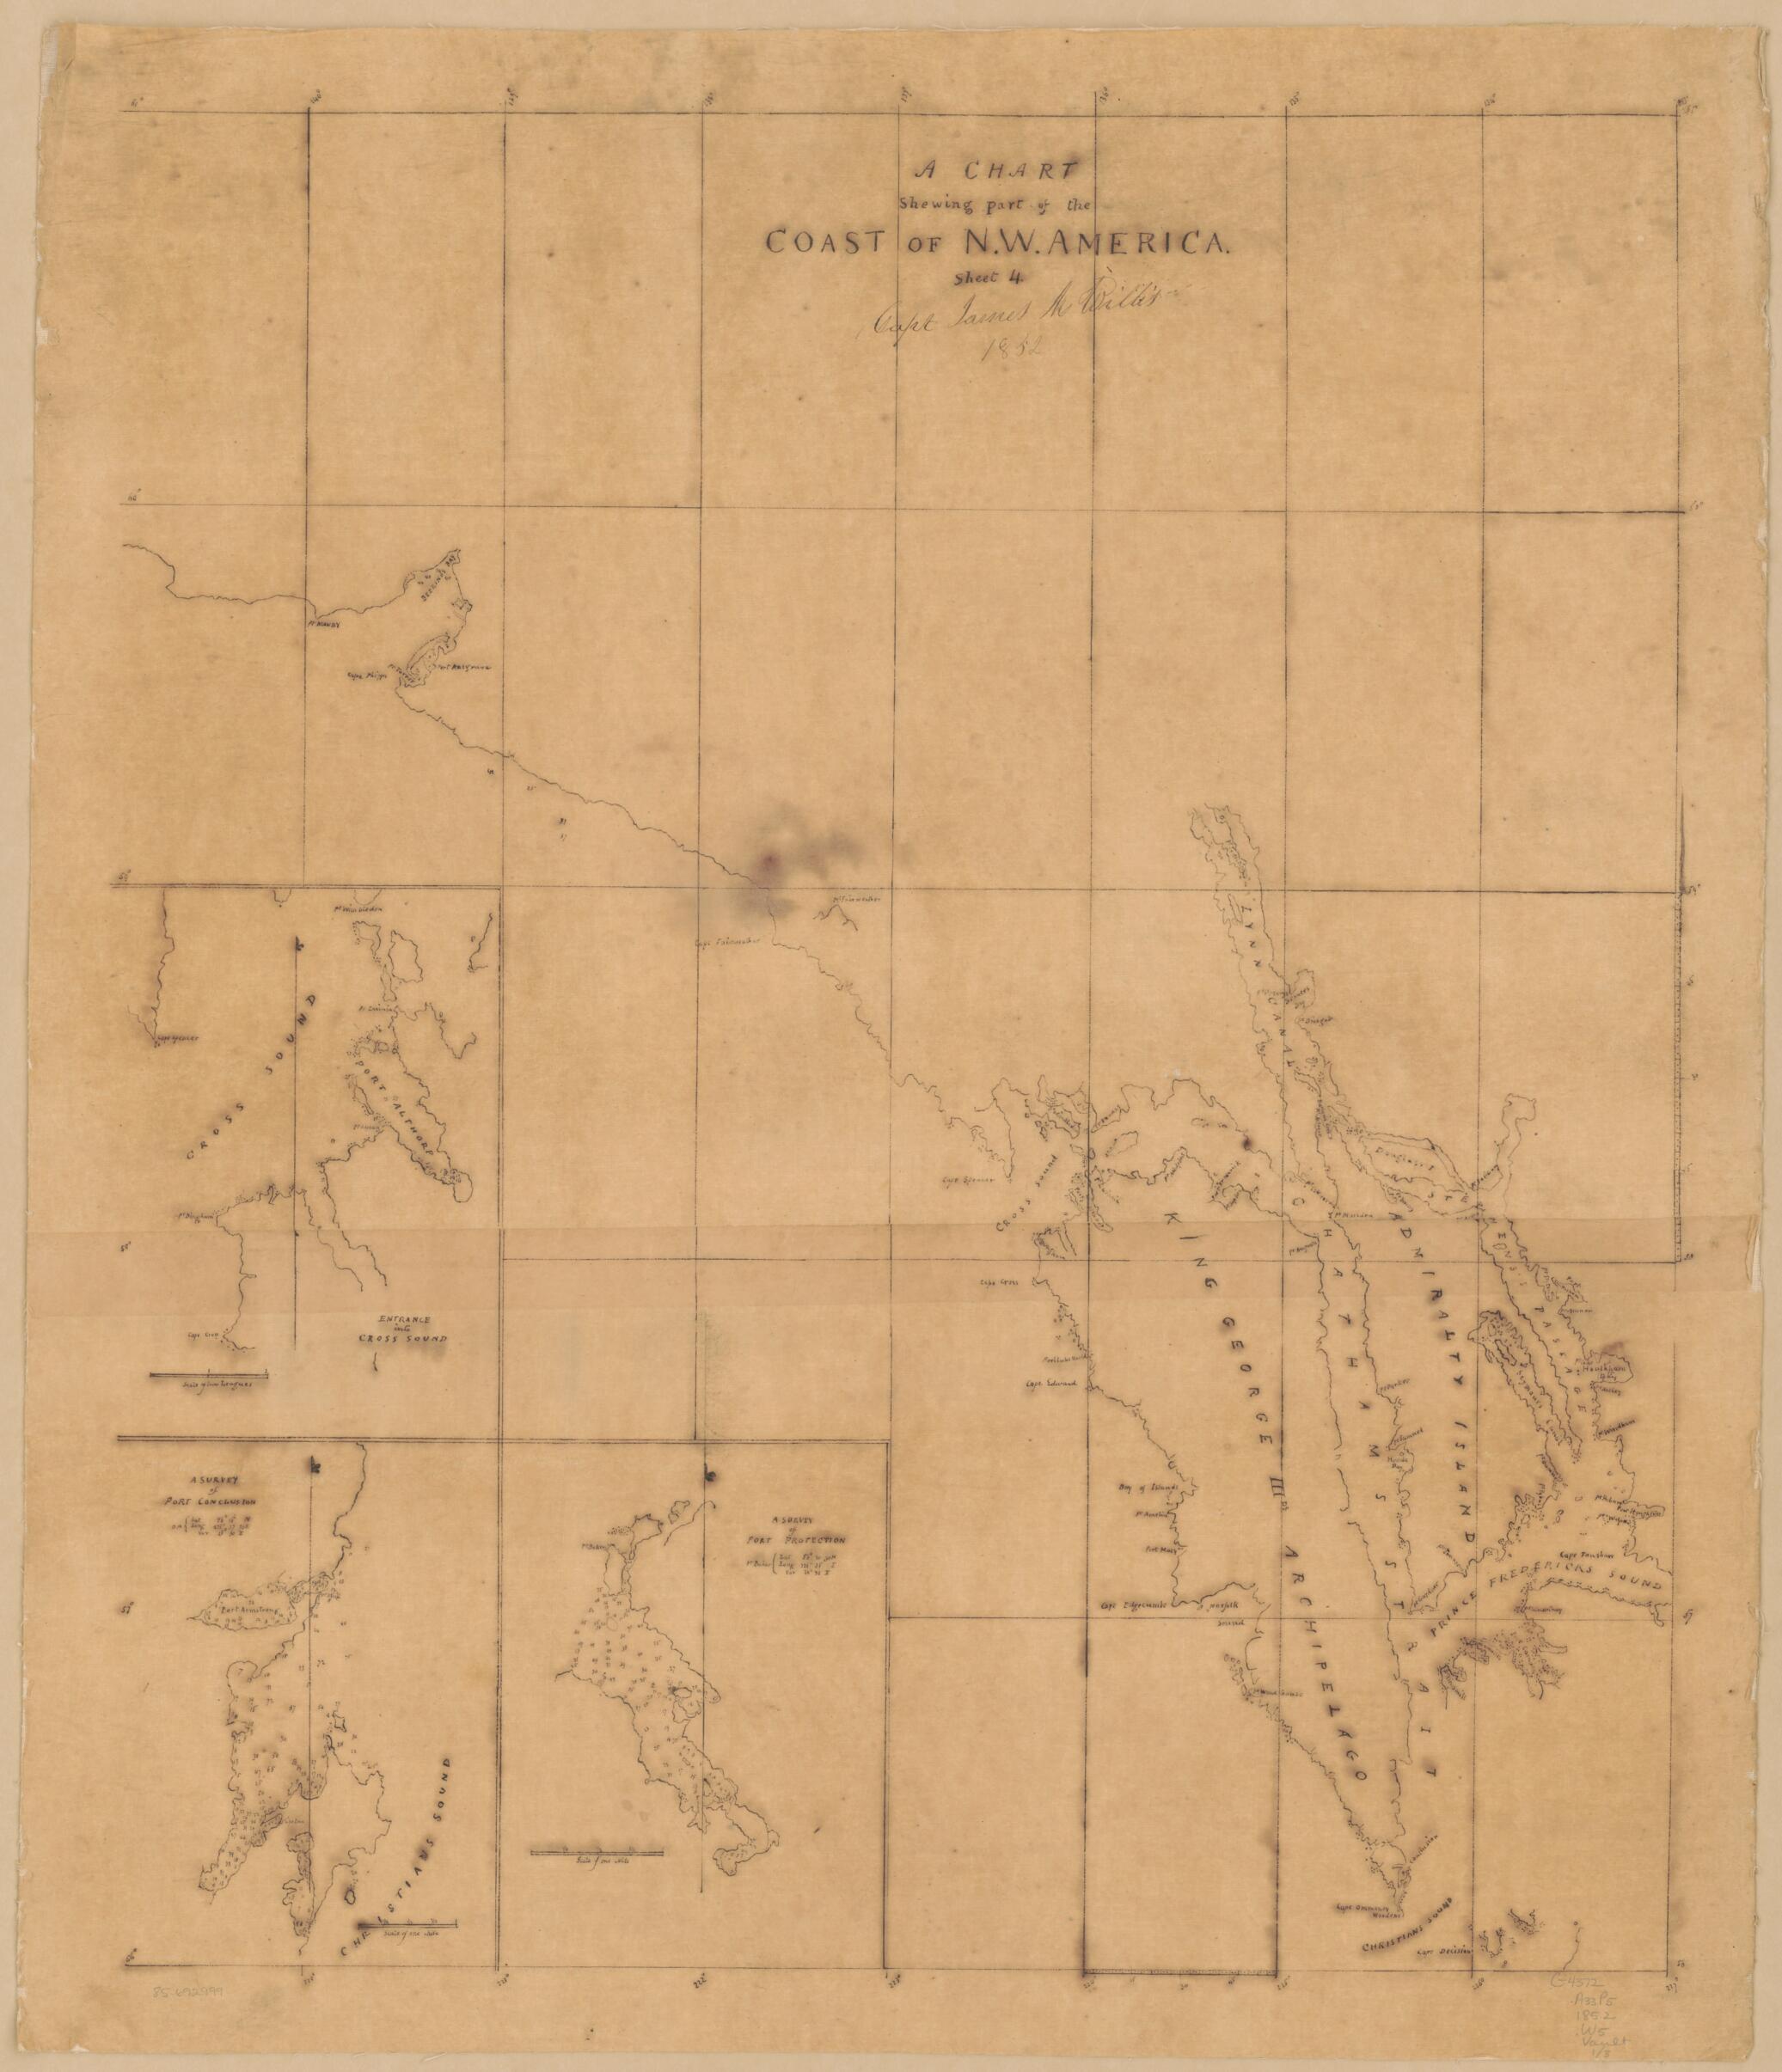 This old map of A Chart Shewing sic Part of the Coast of N.W. America from 1852 was created by James M. Willis in 1852